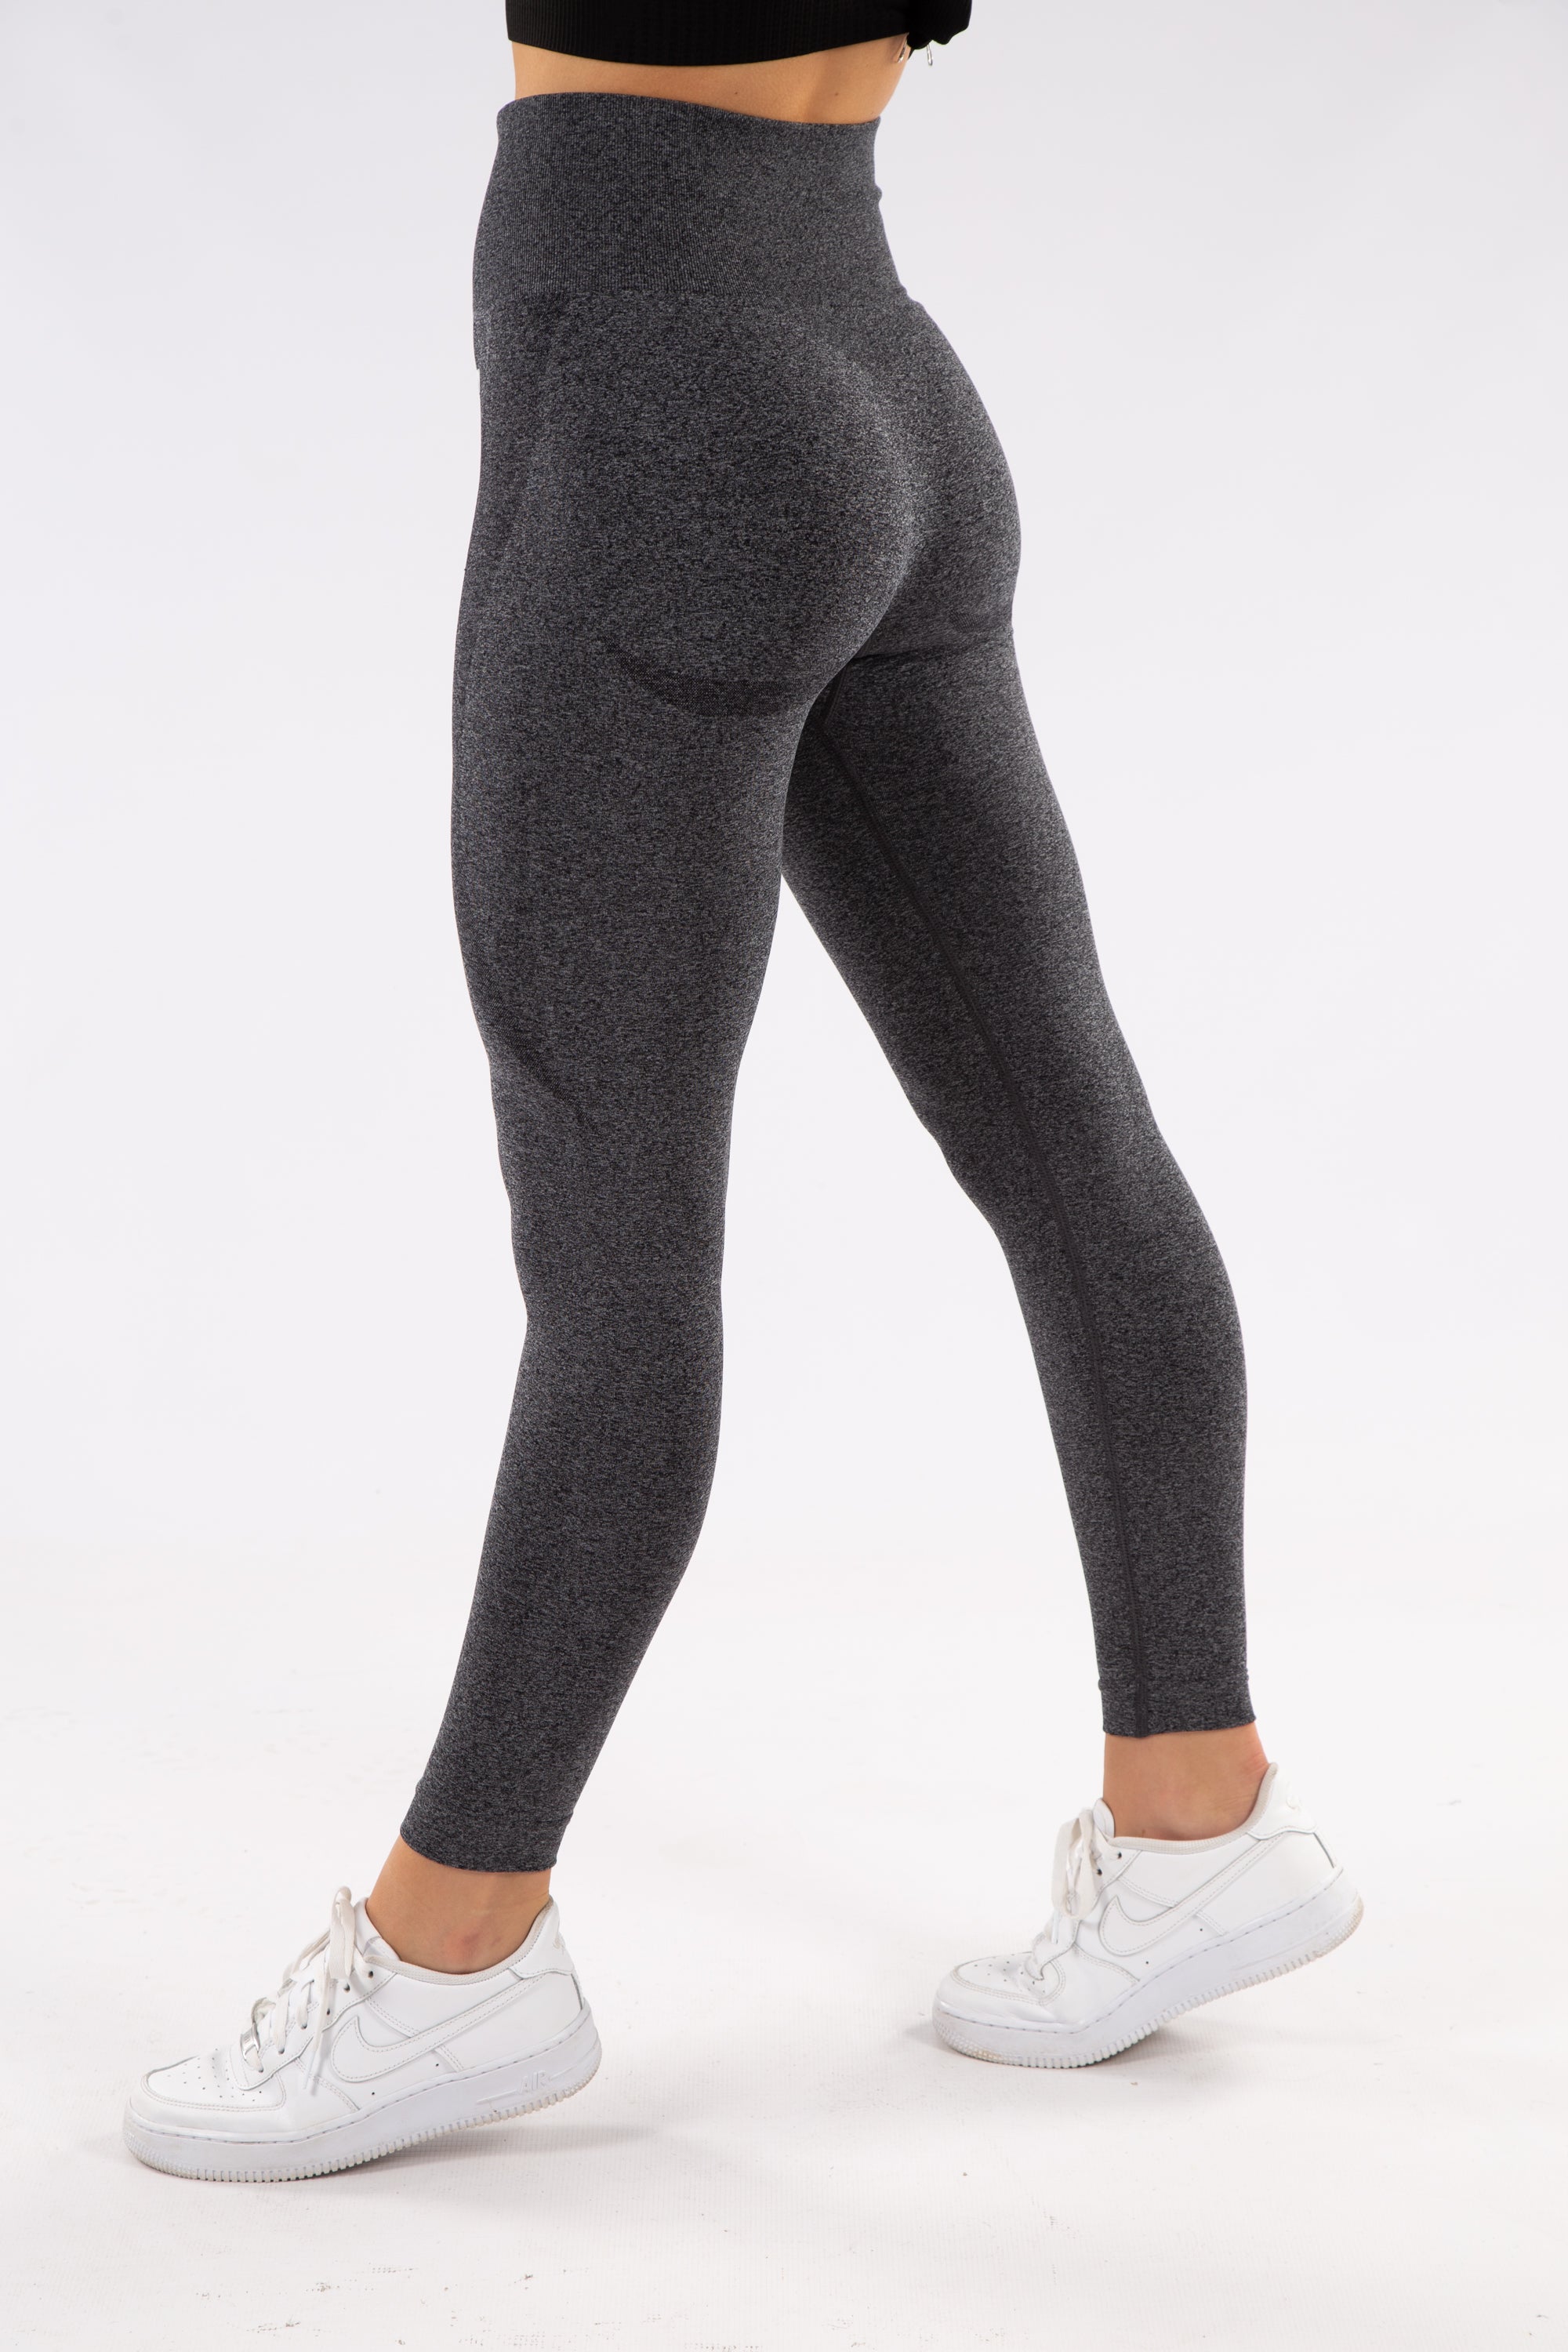 Seamless leggings have contour shadowing designed to enhance the beauty ...